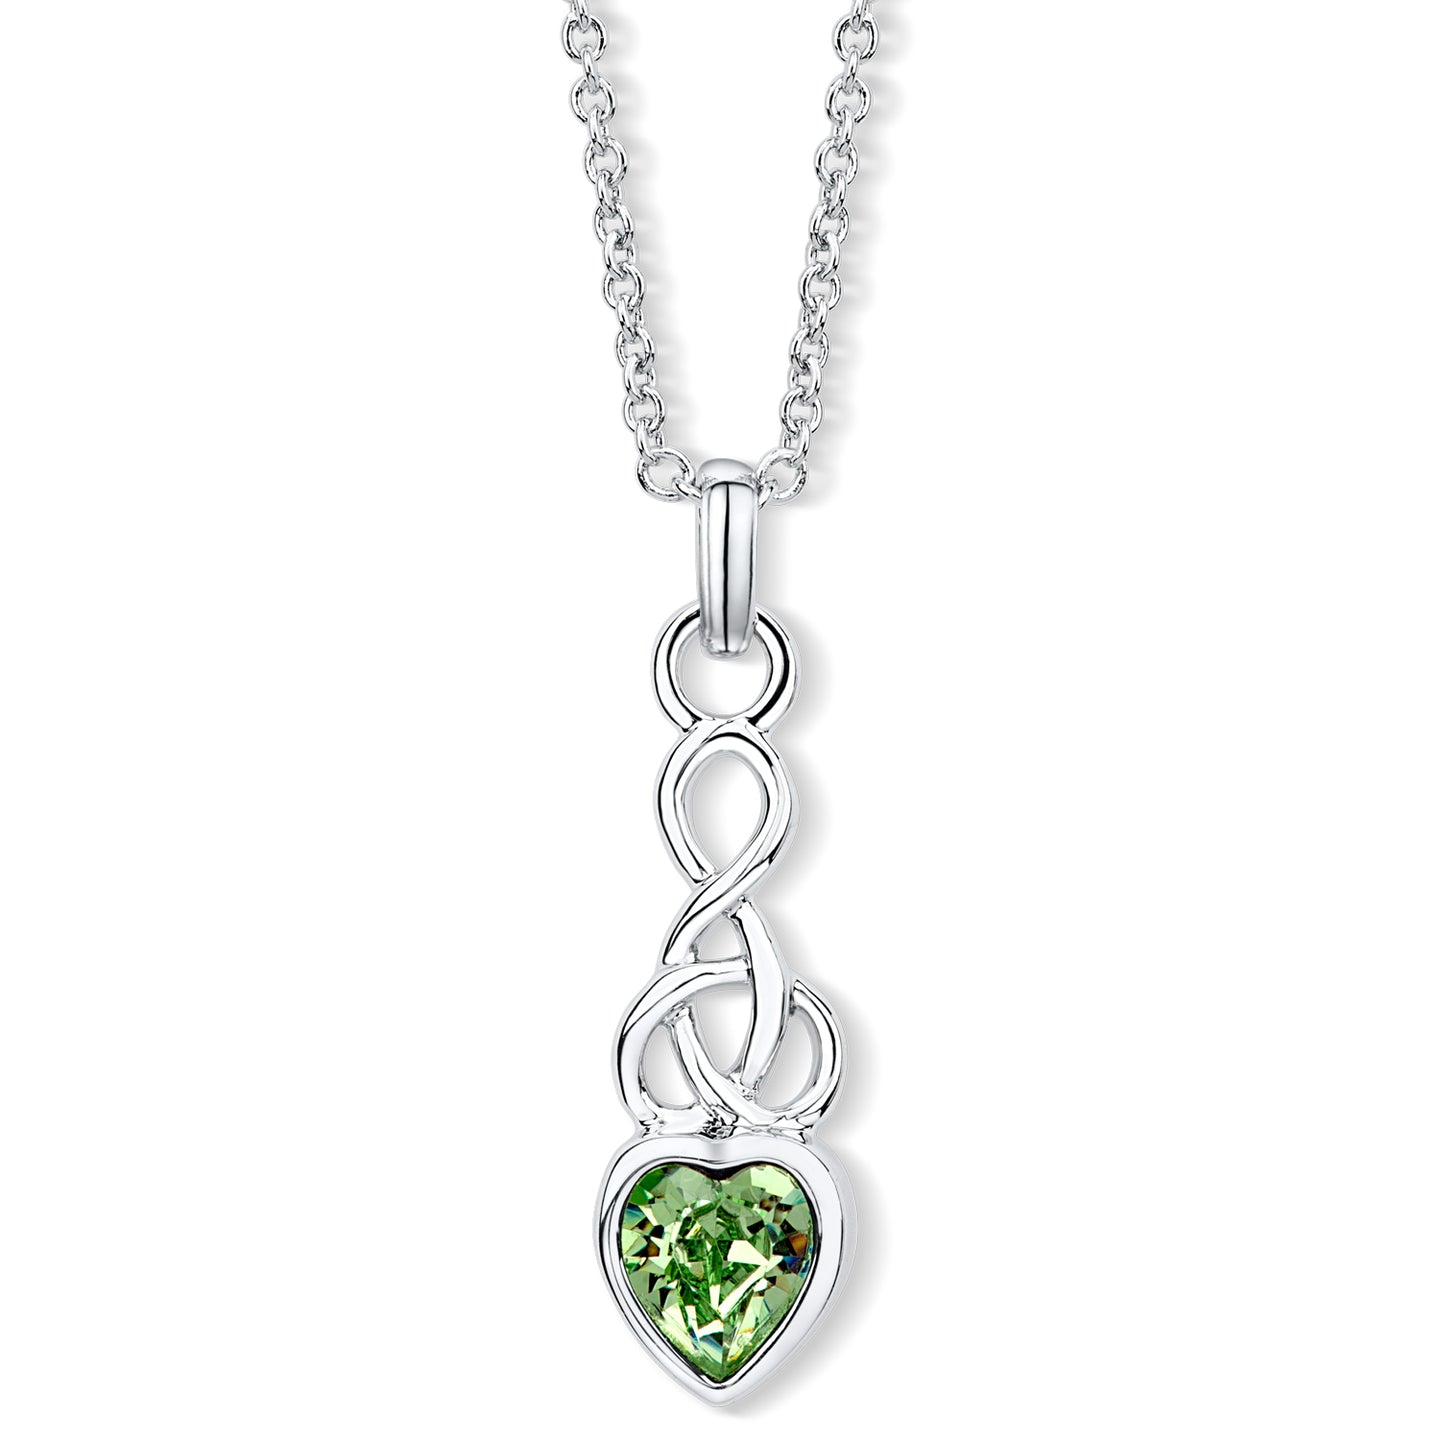 Celtic Heart Pendant with Peridot Crystal